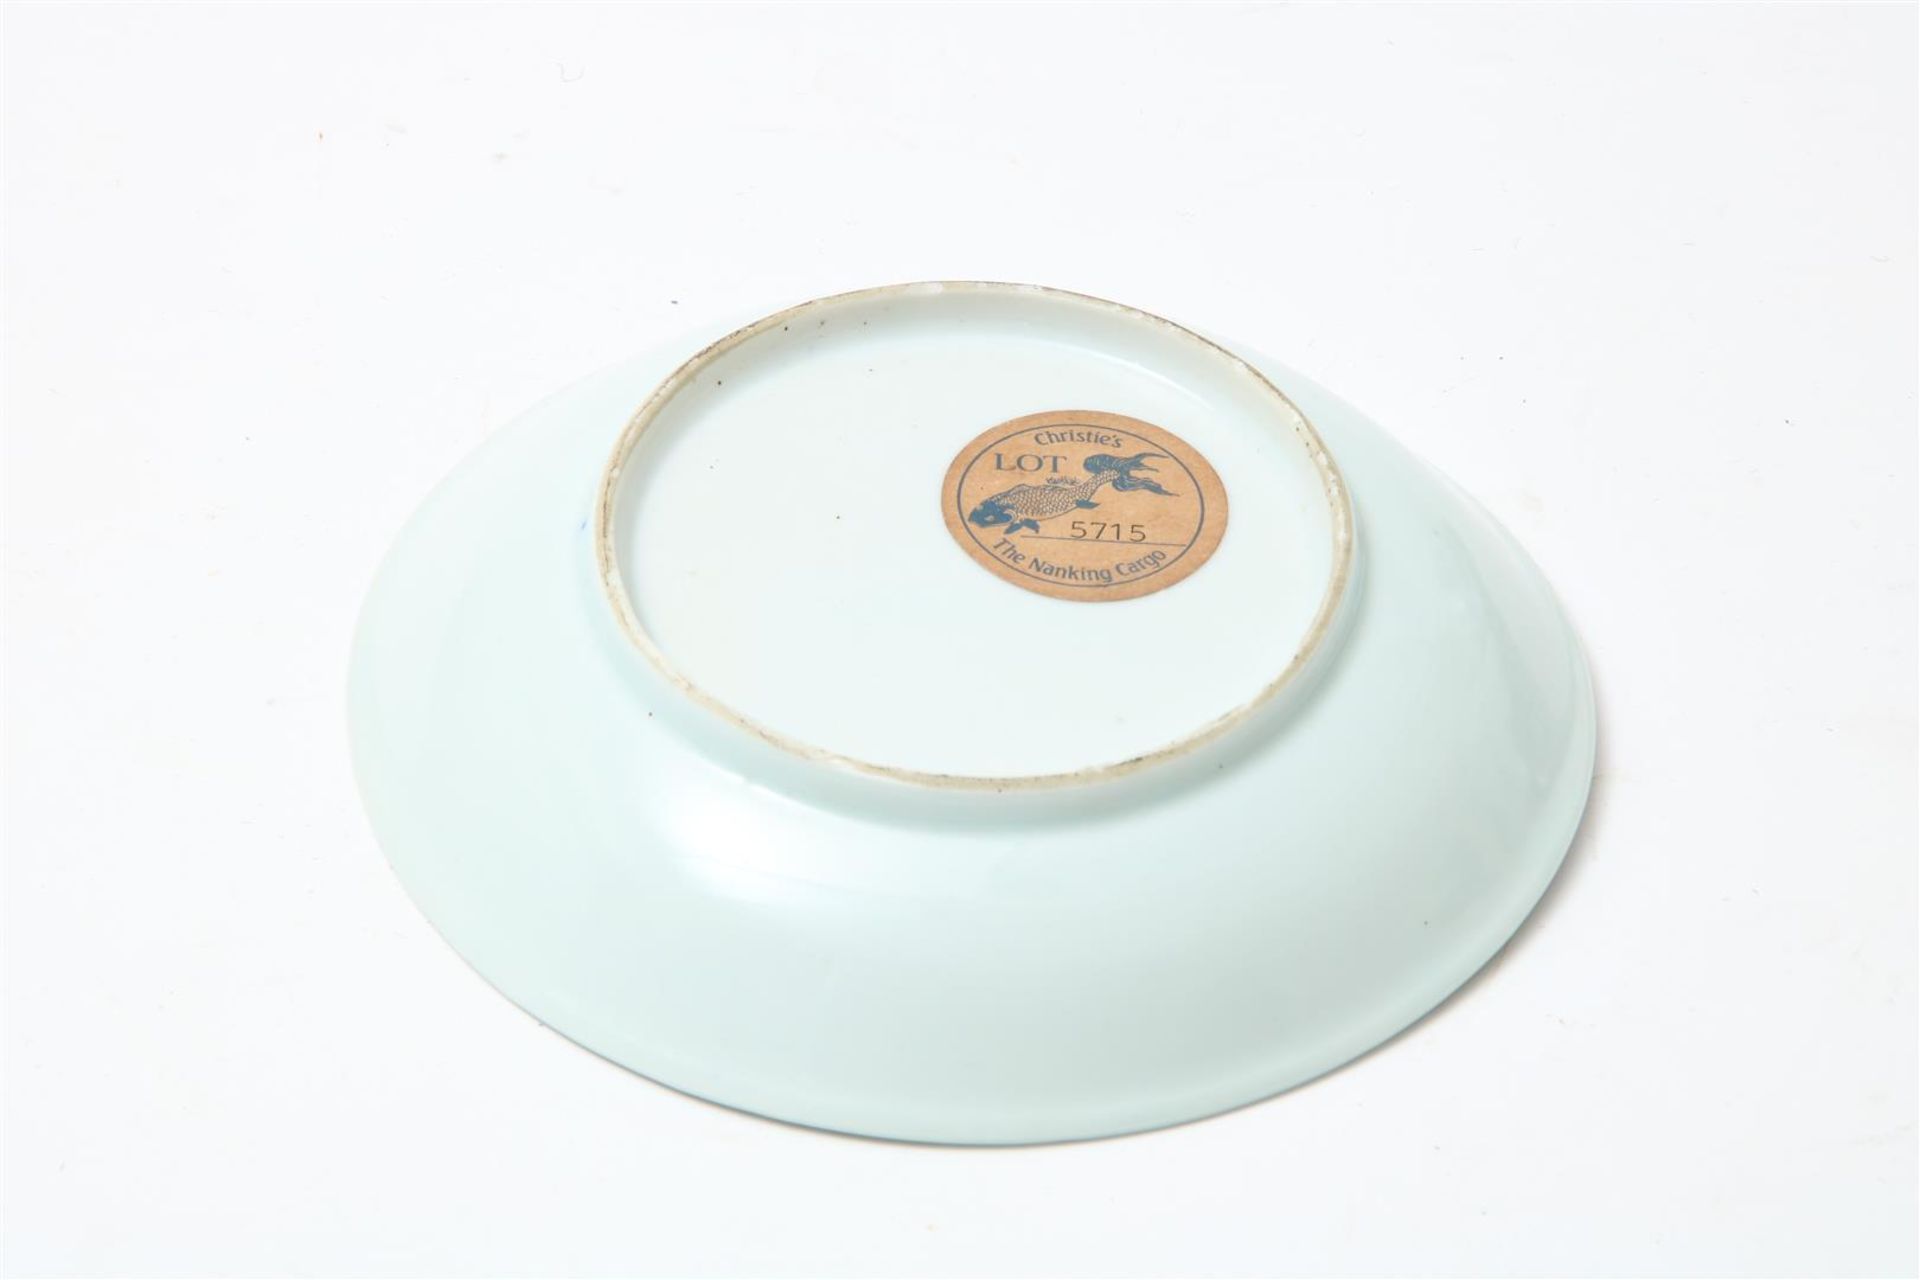 Lot of 5 porcelain dishes (edge flakes) and 4 various saucers, including The Nanking Cargo and Ming, - Image 19 of 19